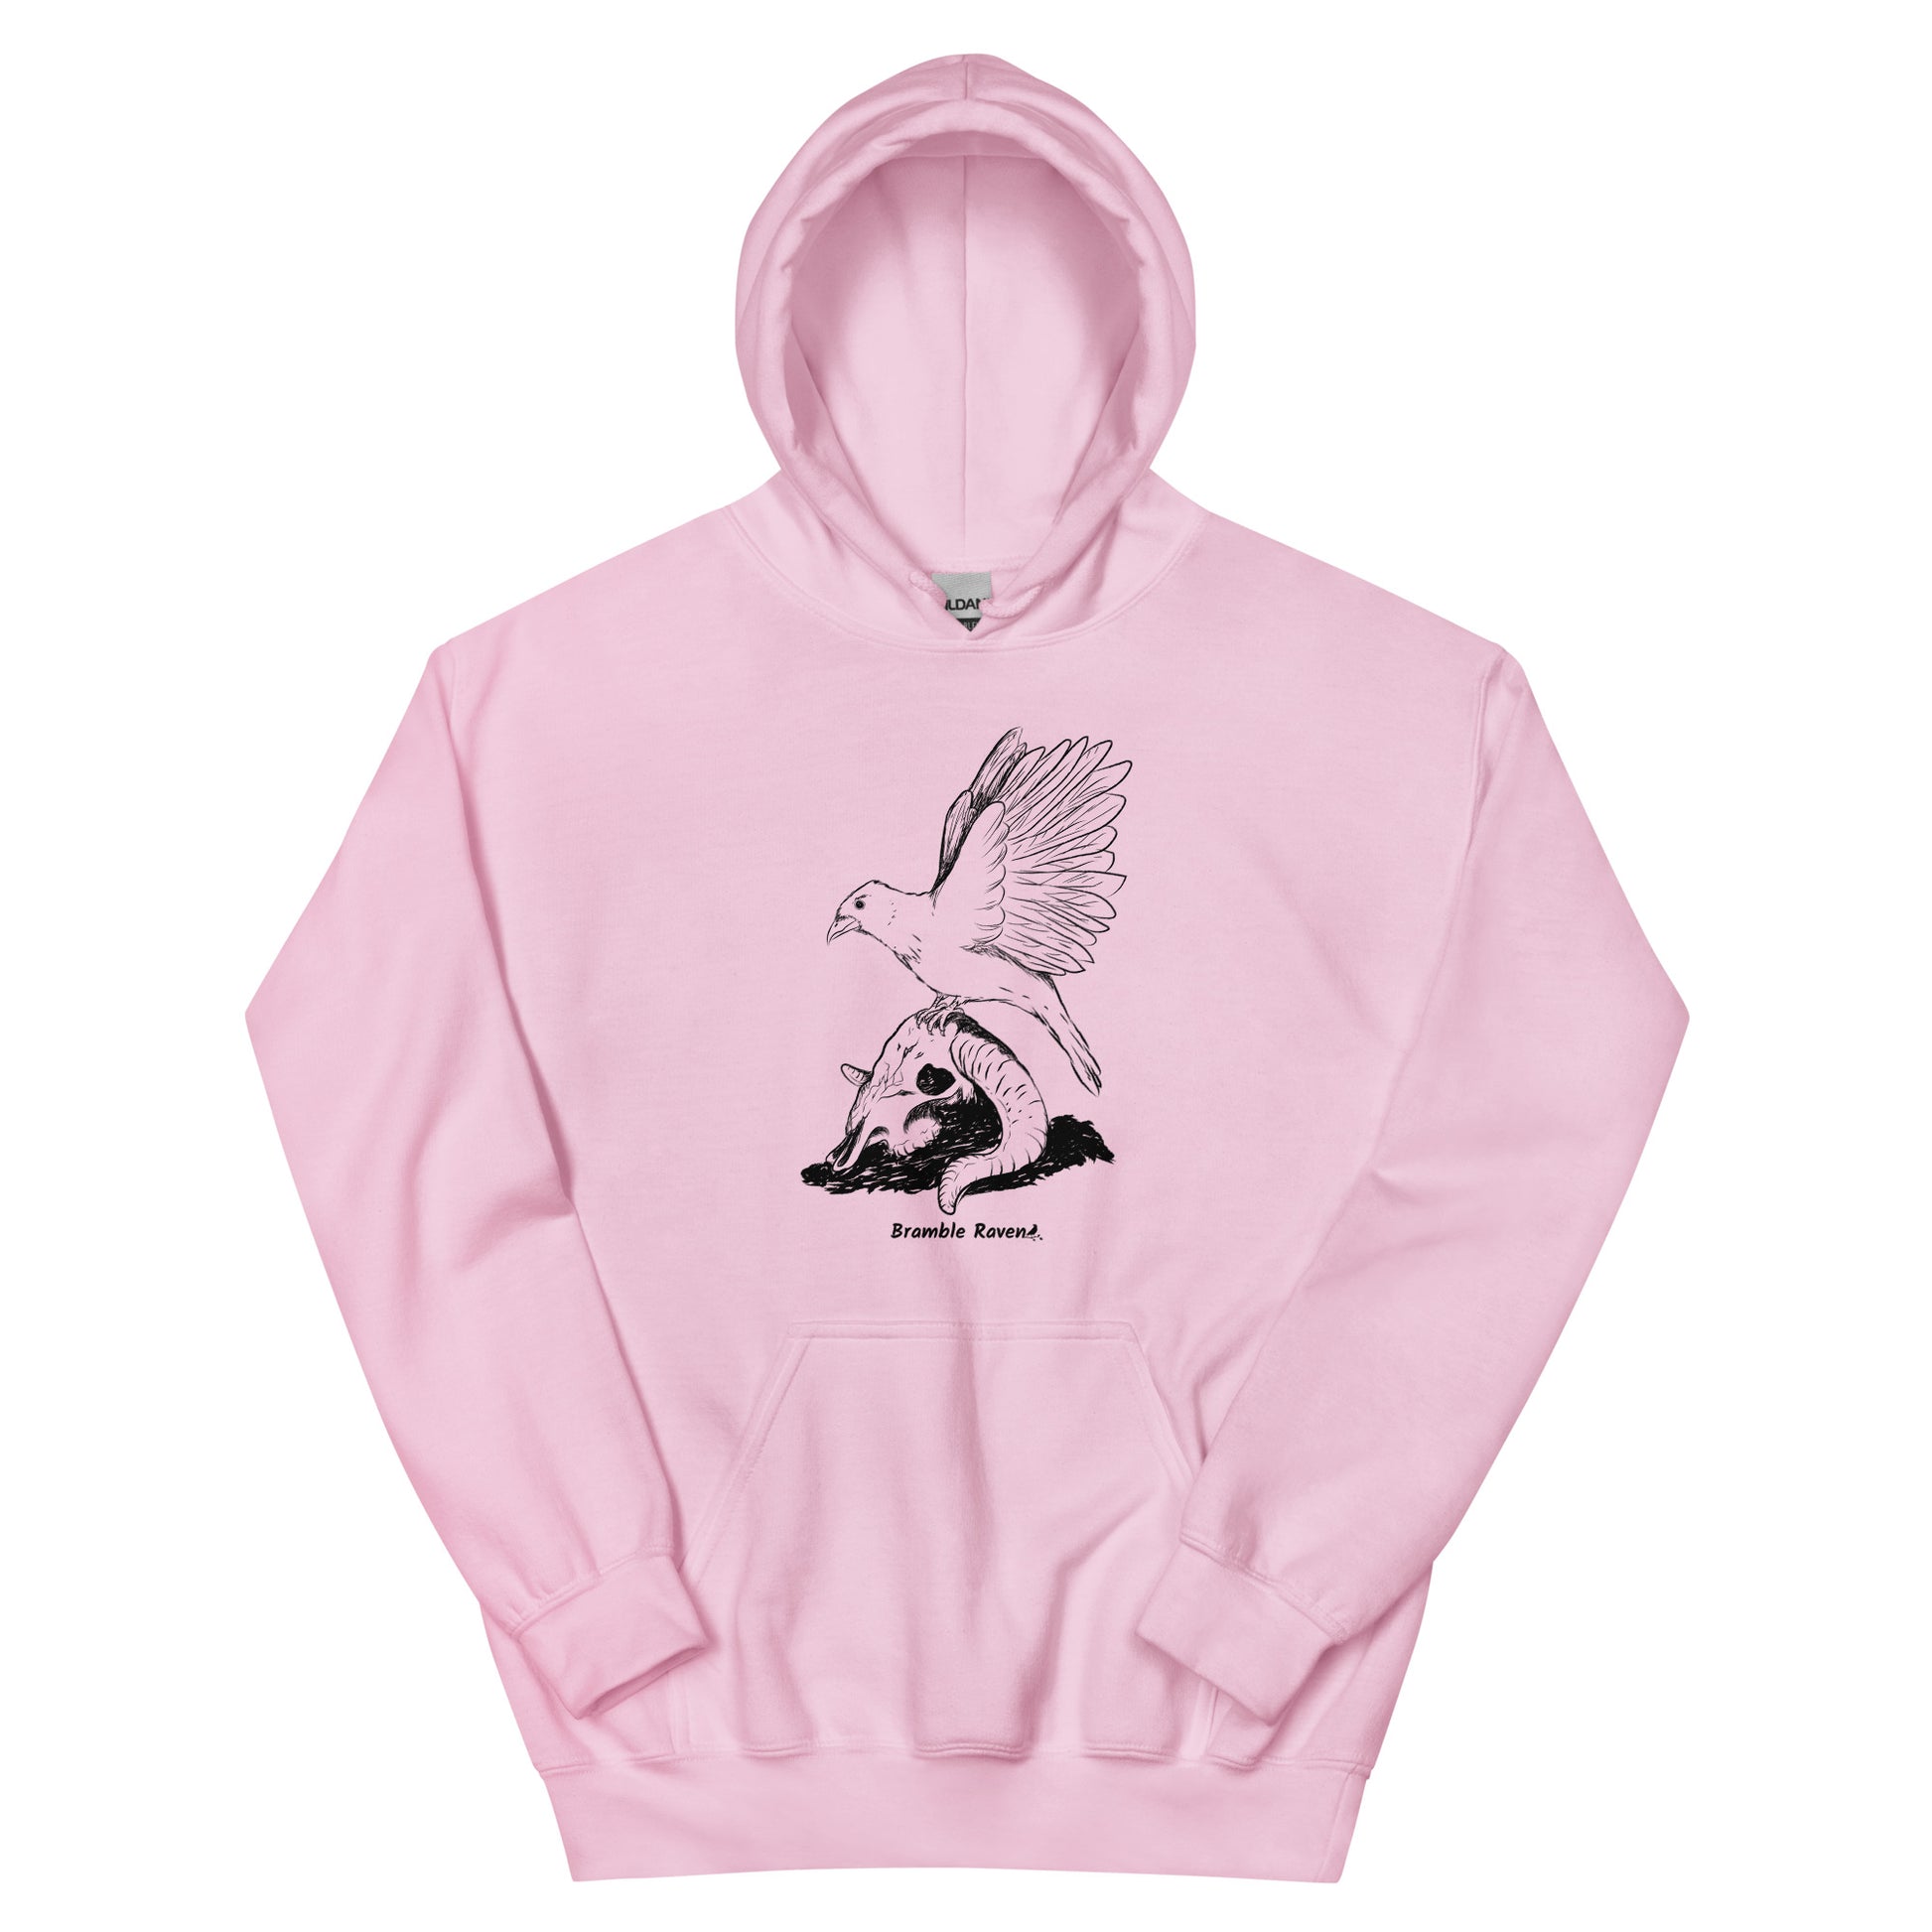 Light pink colored unisex Reflections hoodie. Features image of a crow with wings outstretched sitting on a sheep skull.  Has a front pouch pocket and double lined hood.